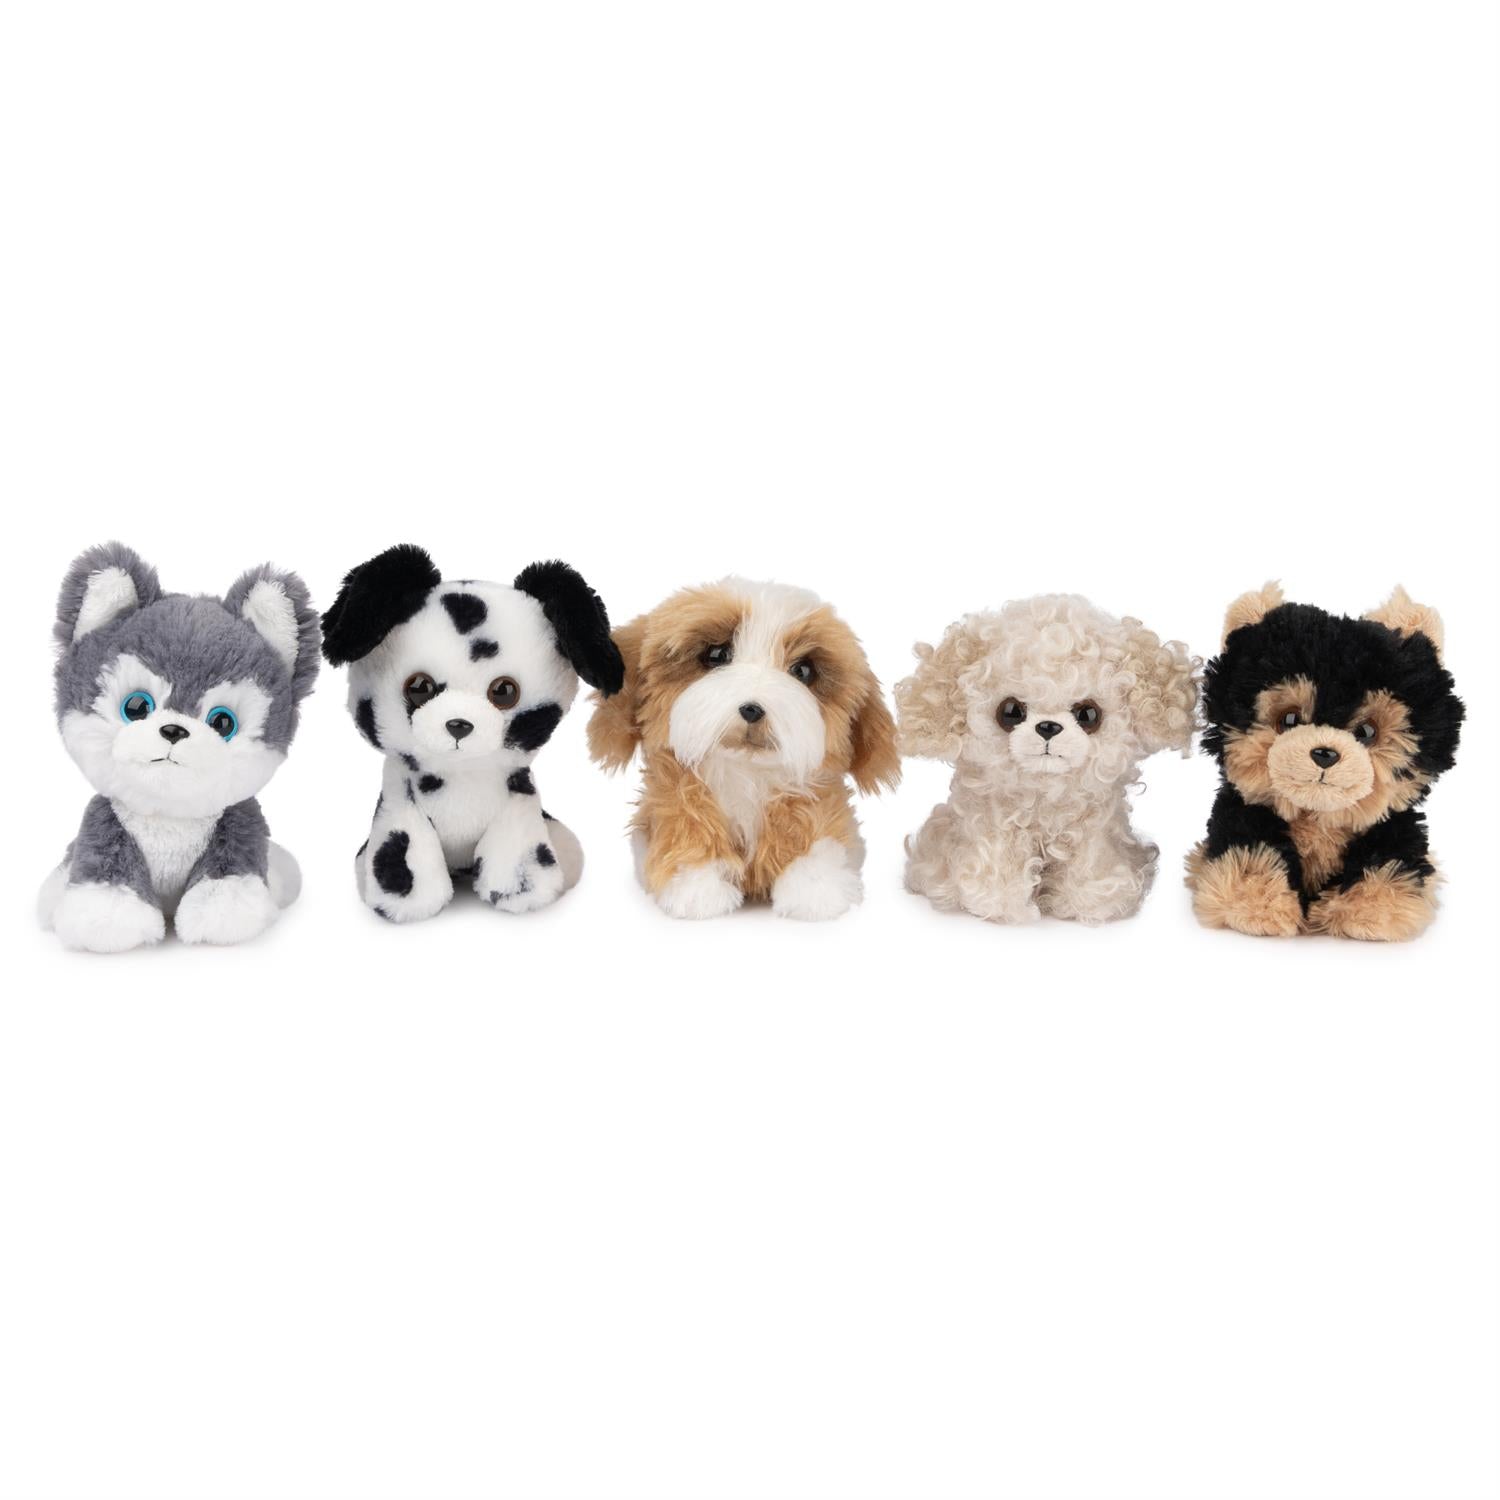 GUND - Boo and Friends - Bowie the Maltipoo - 5 – Jan's Bear